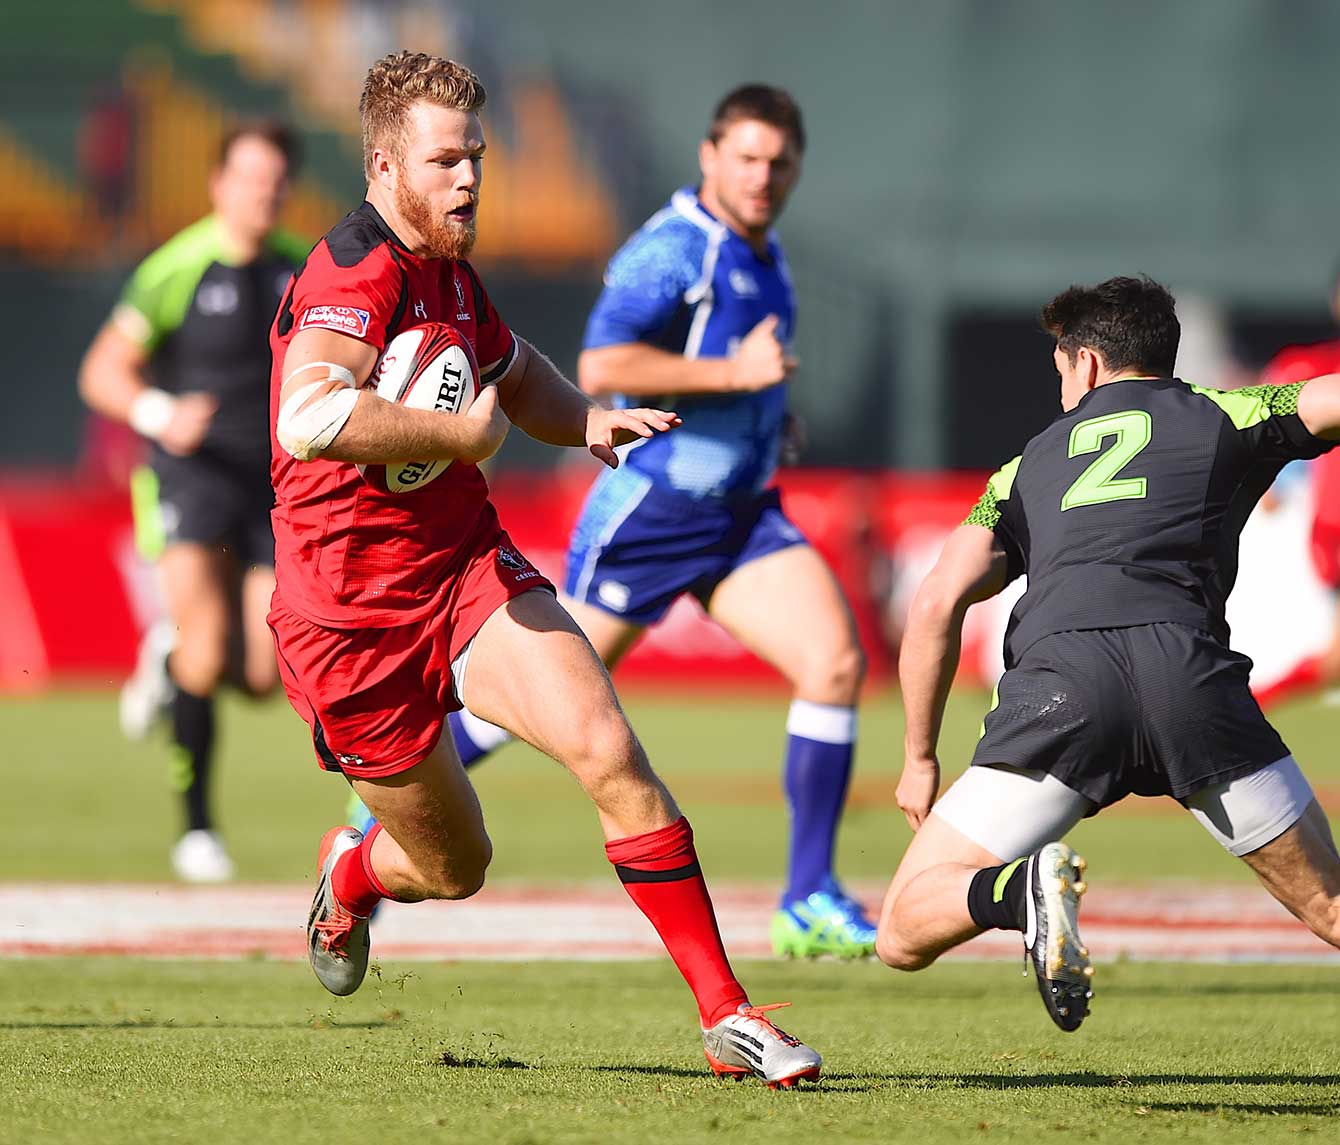 Canada's Conor Trainor carries the ball in sevens action. Photo: Ian Muir / Rugby Canada